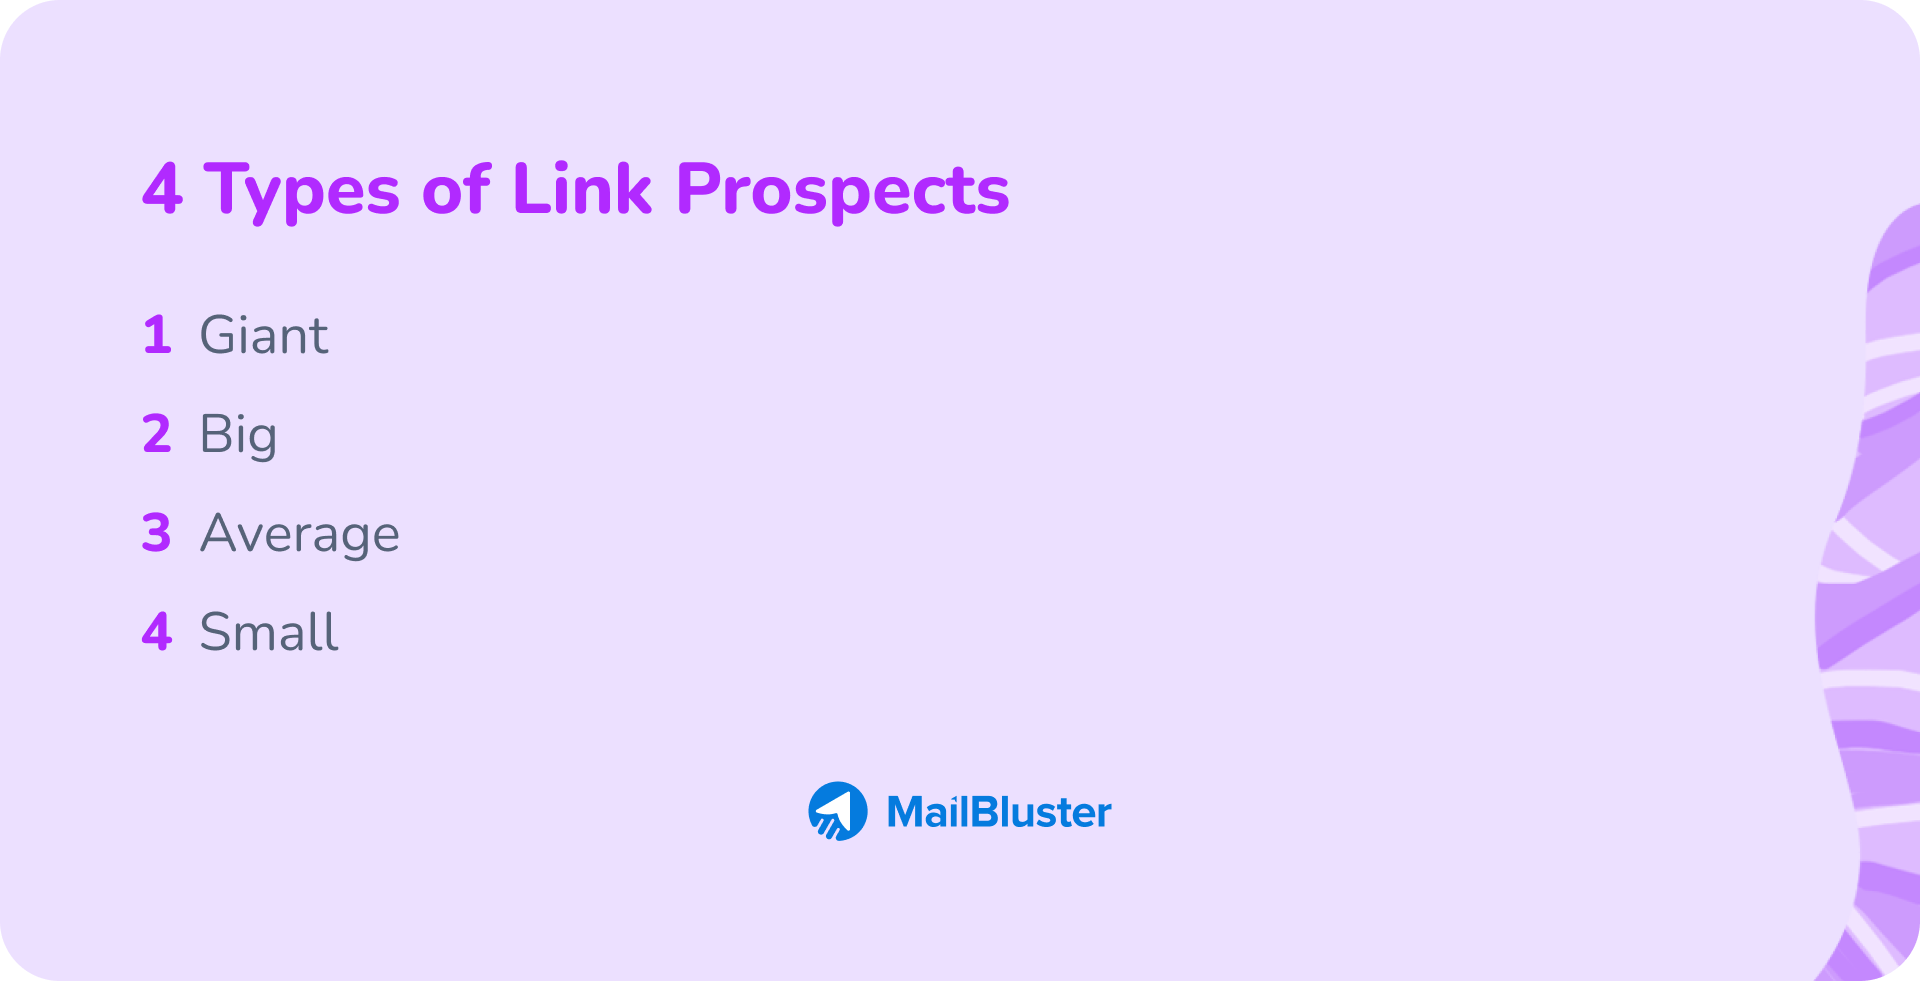 Types of prospects to target for getting backlinks